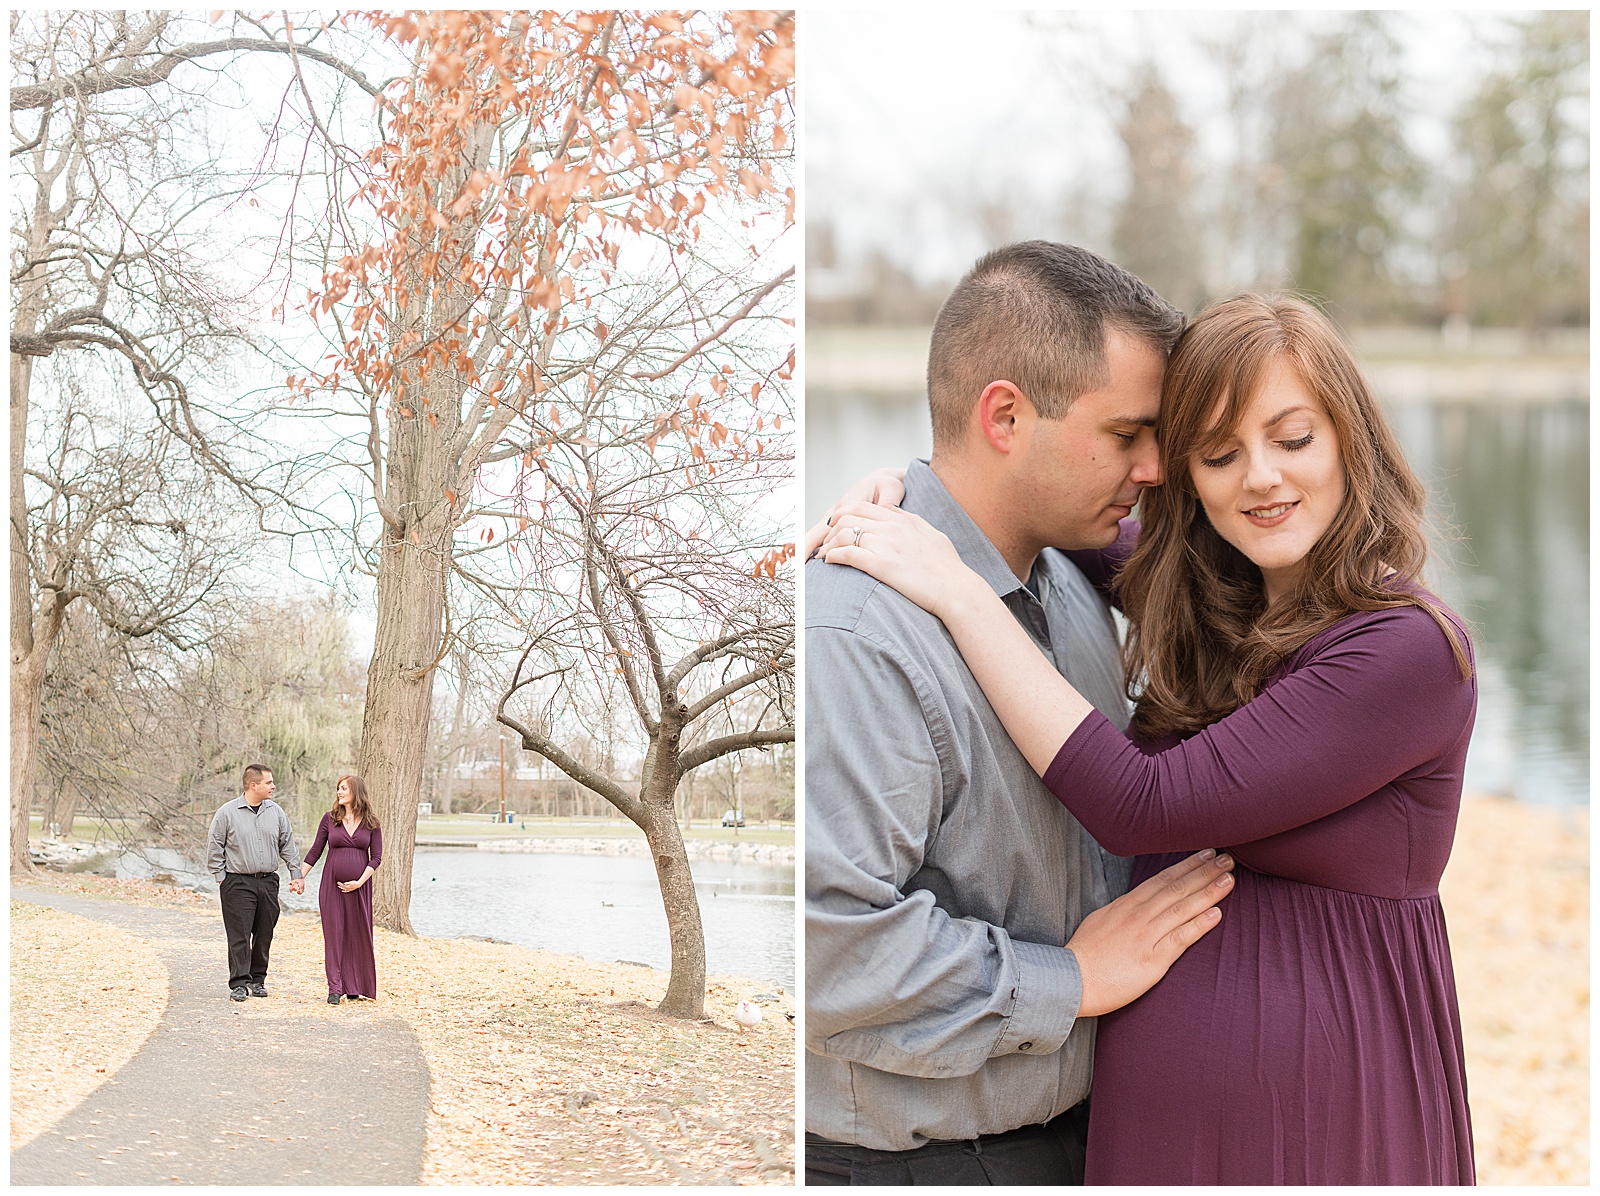 maternity session at Longs park. Guy has hand resting on belly